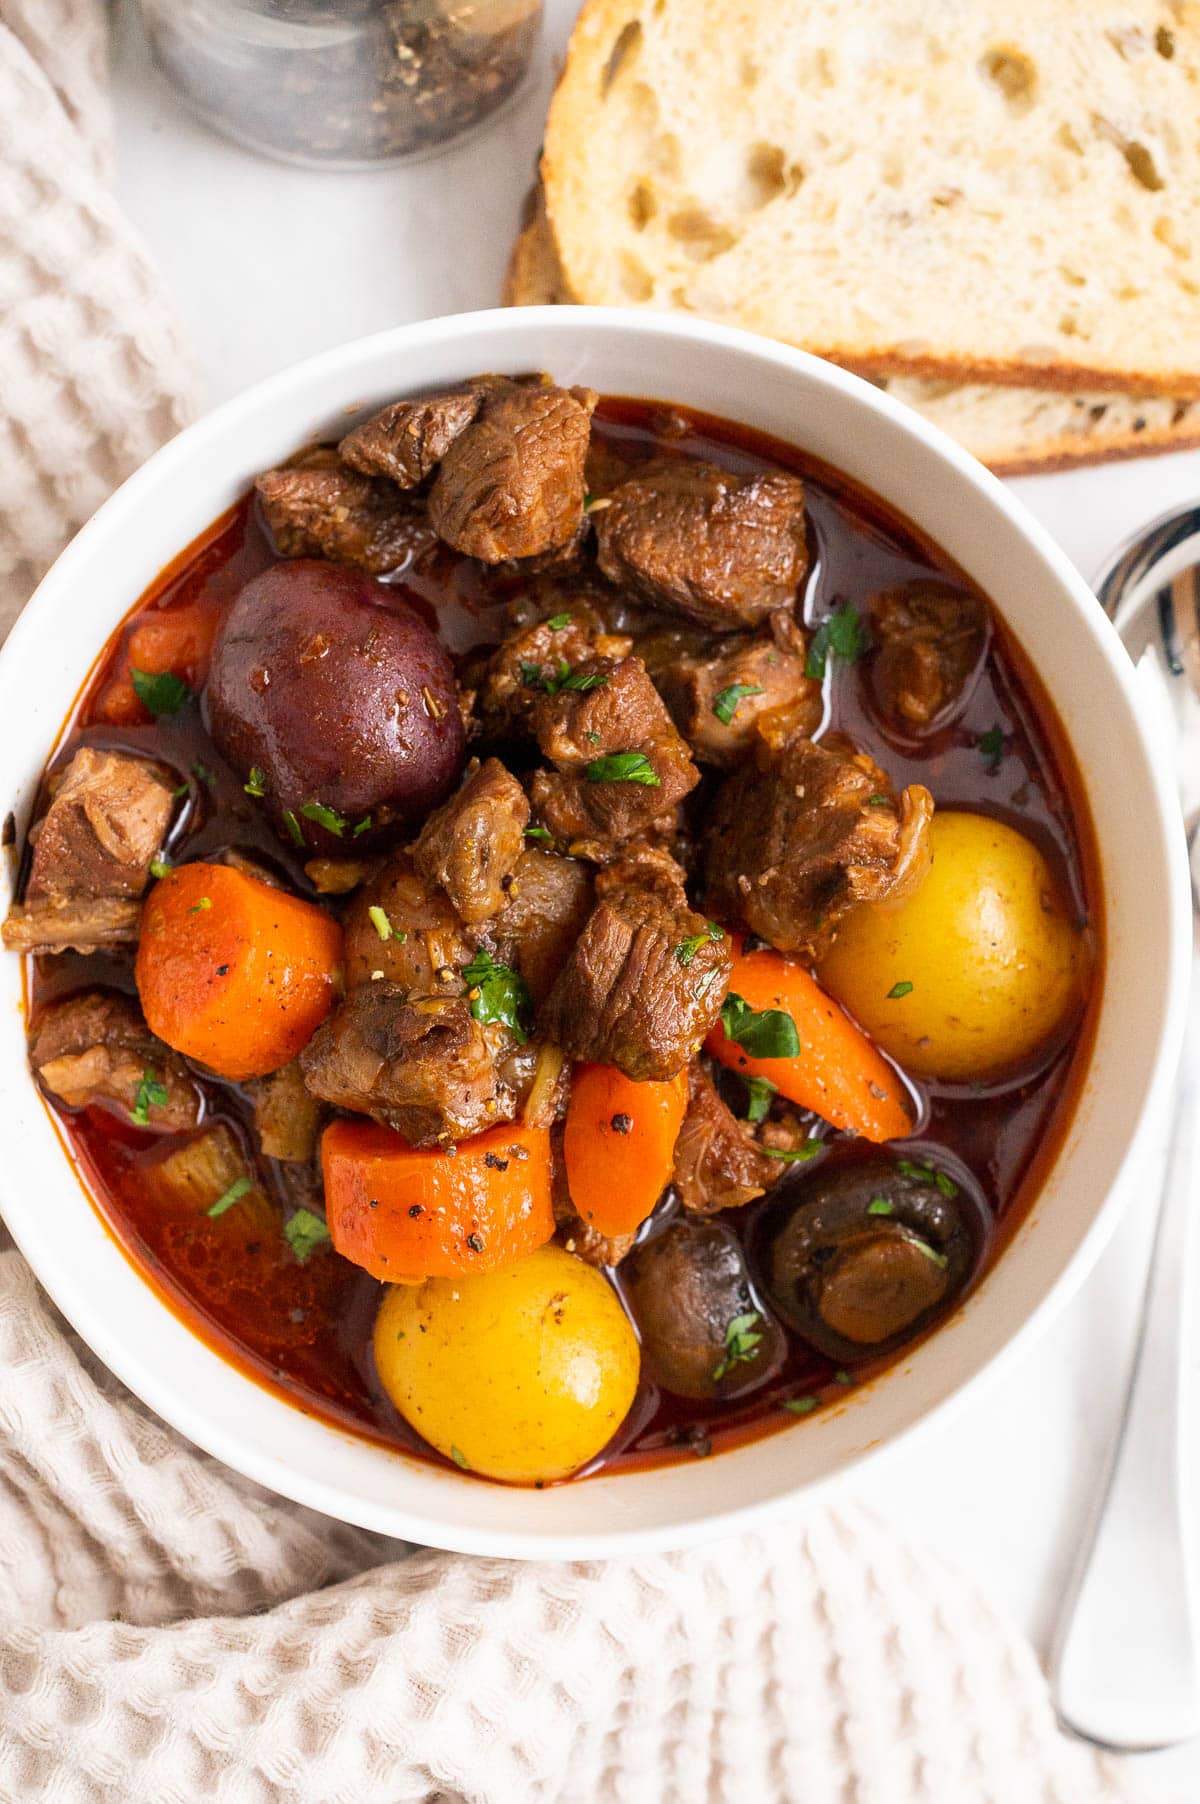 A bowl of lamb stew served with bread.